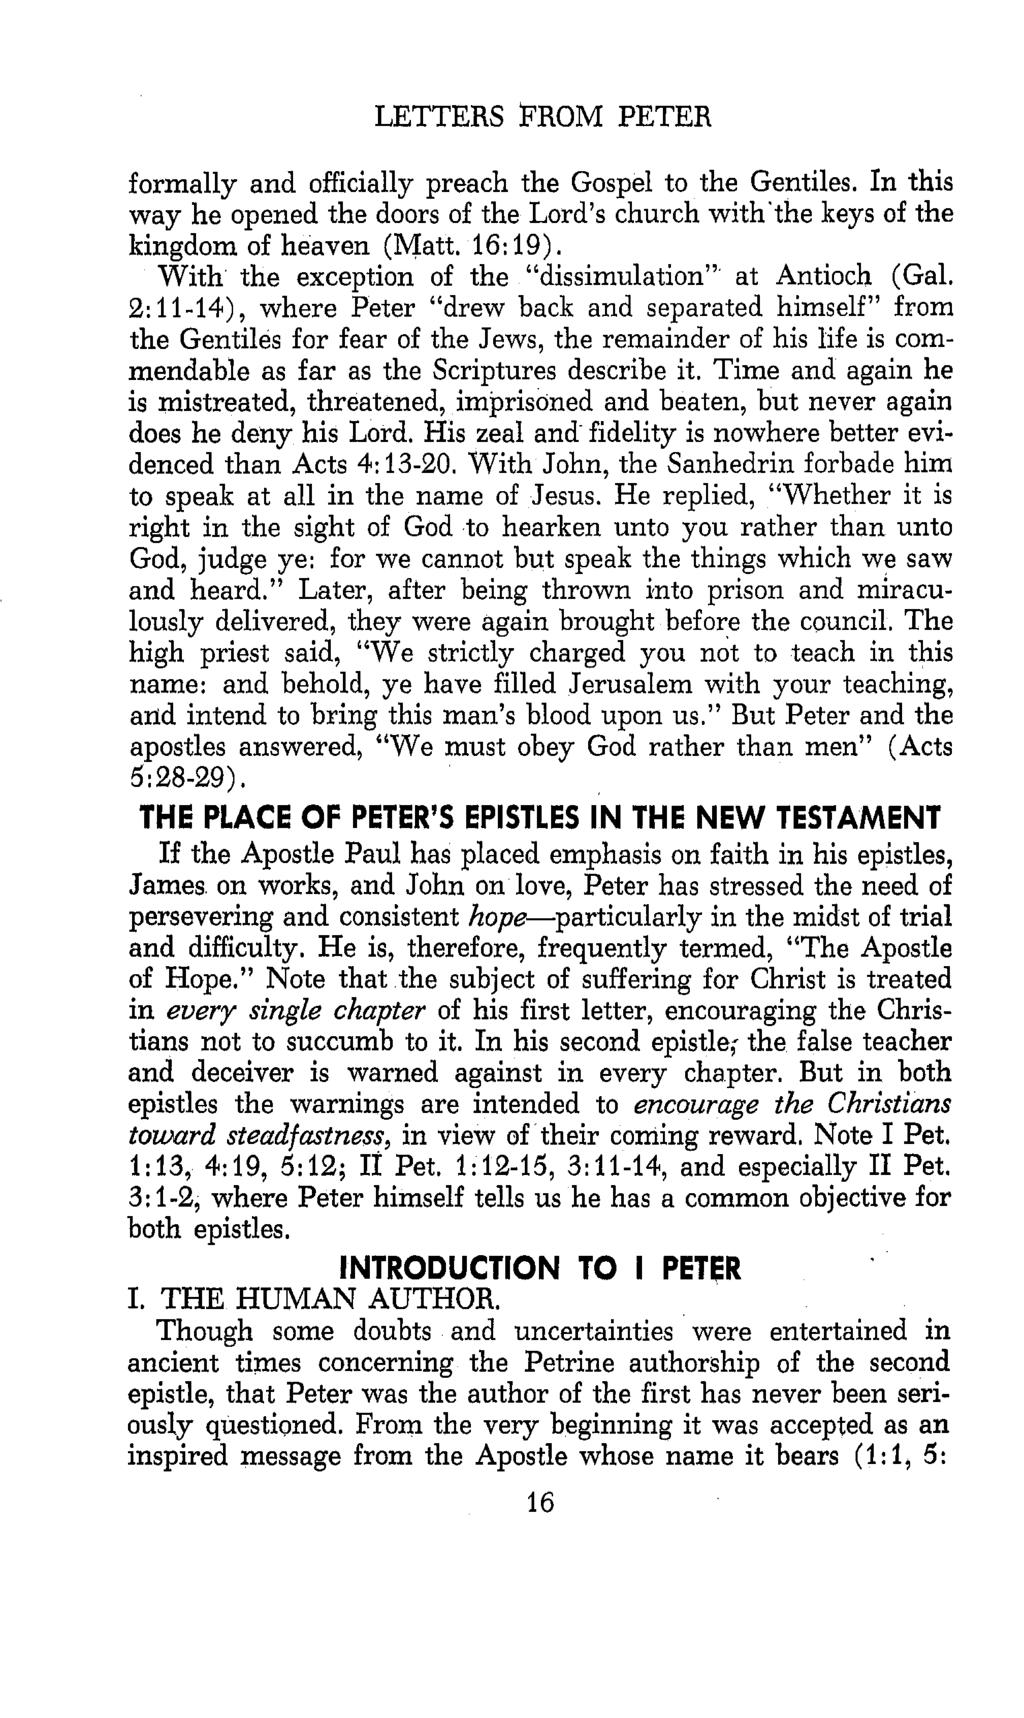 LETTERS FROM PETER formally and officially preach the Gospel to the Gentiles. In this way he opened the doors of the Lord s church with the keys of the kingdom of heaven (Matt. 16: 19).